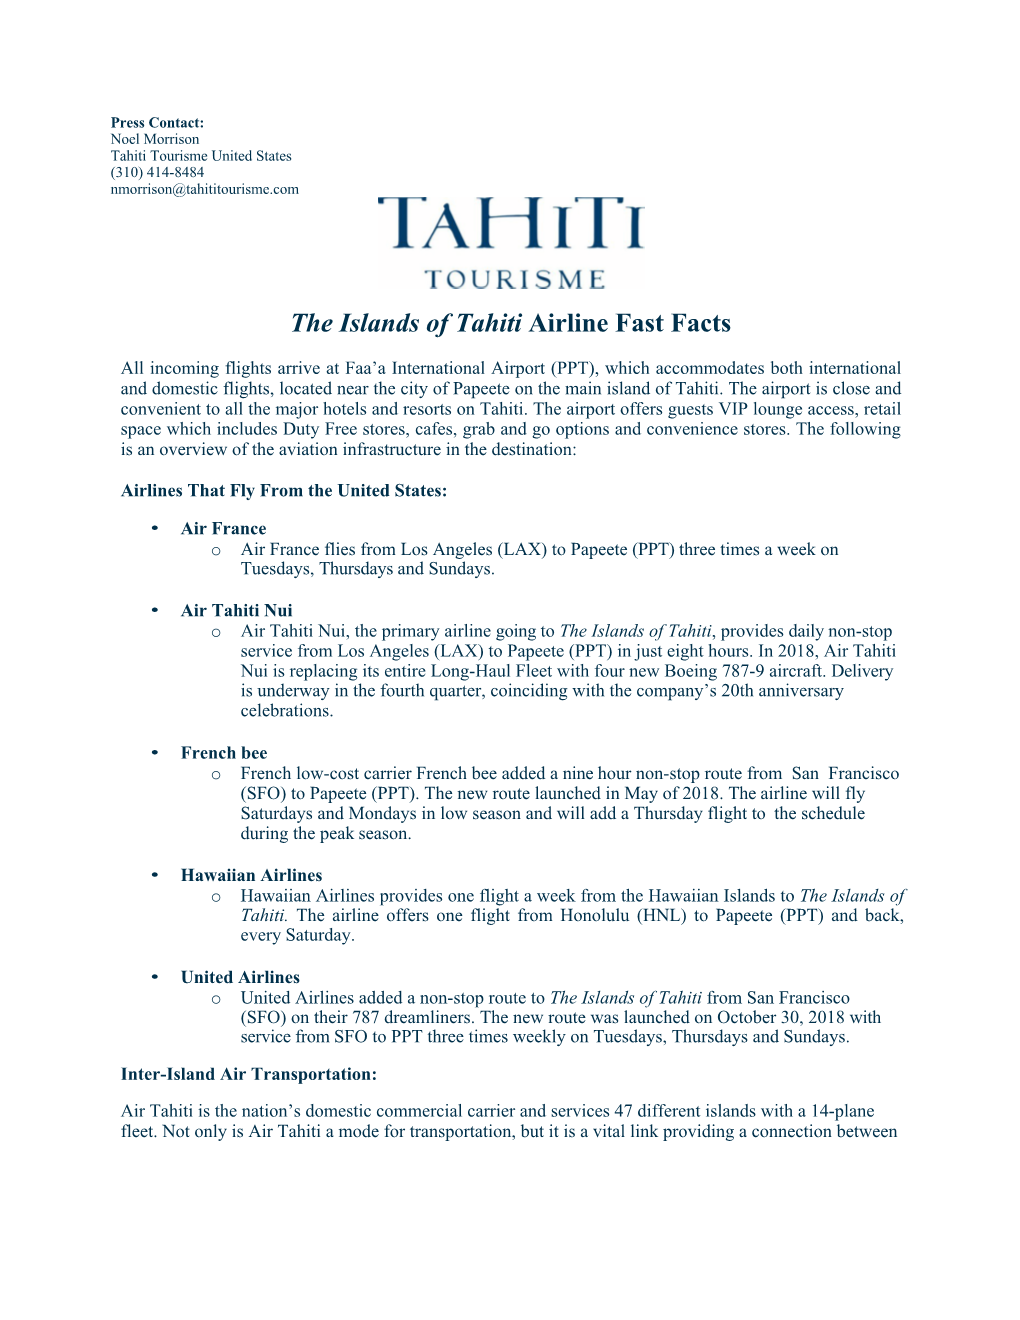 The Islands of Tahiti Airline Fast Facts